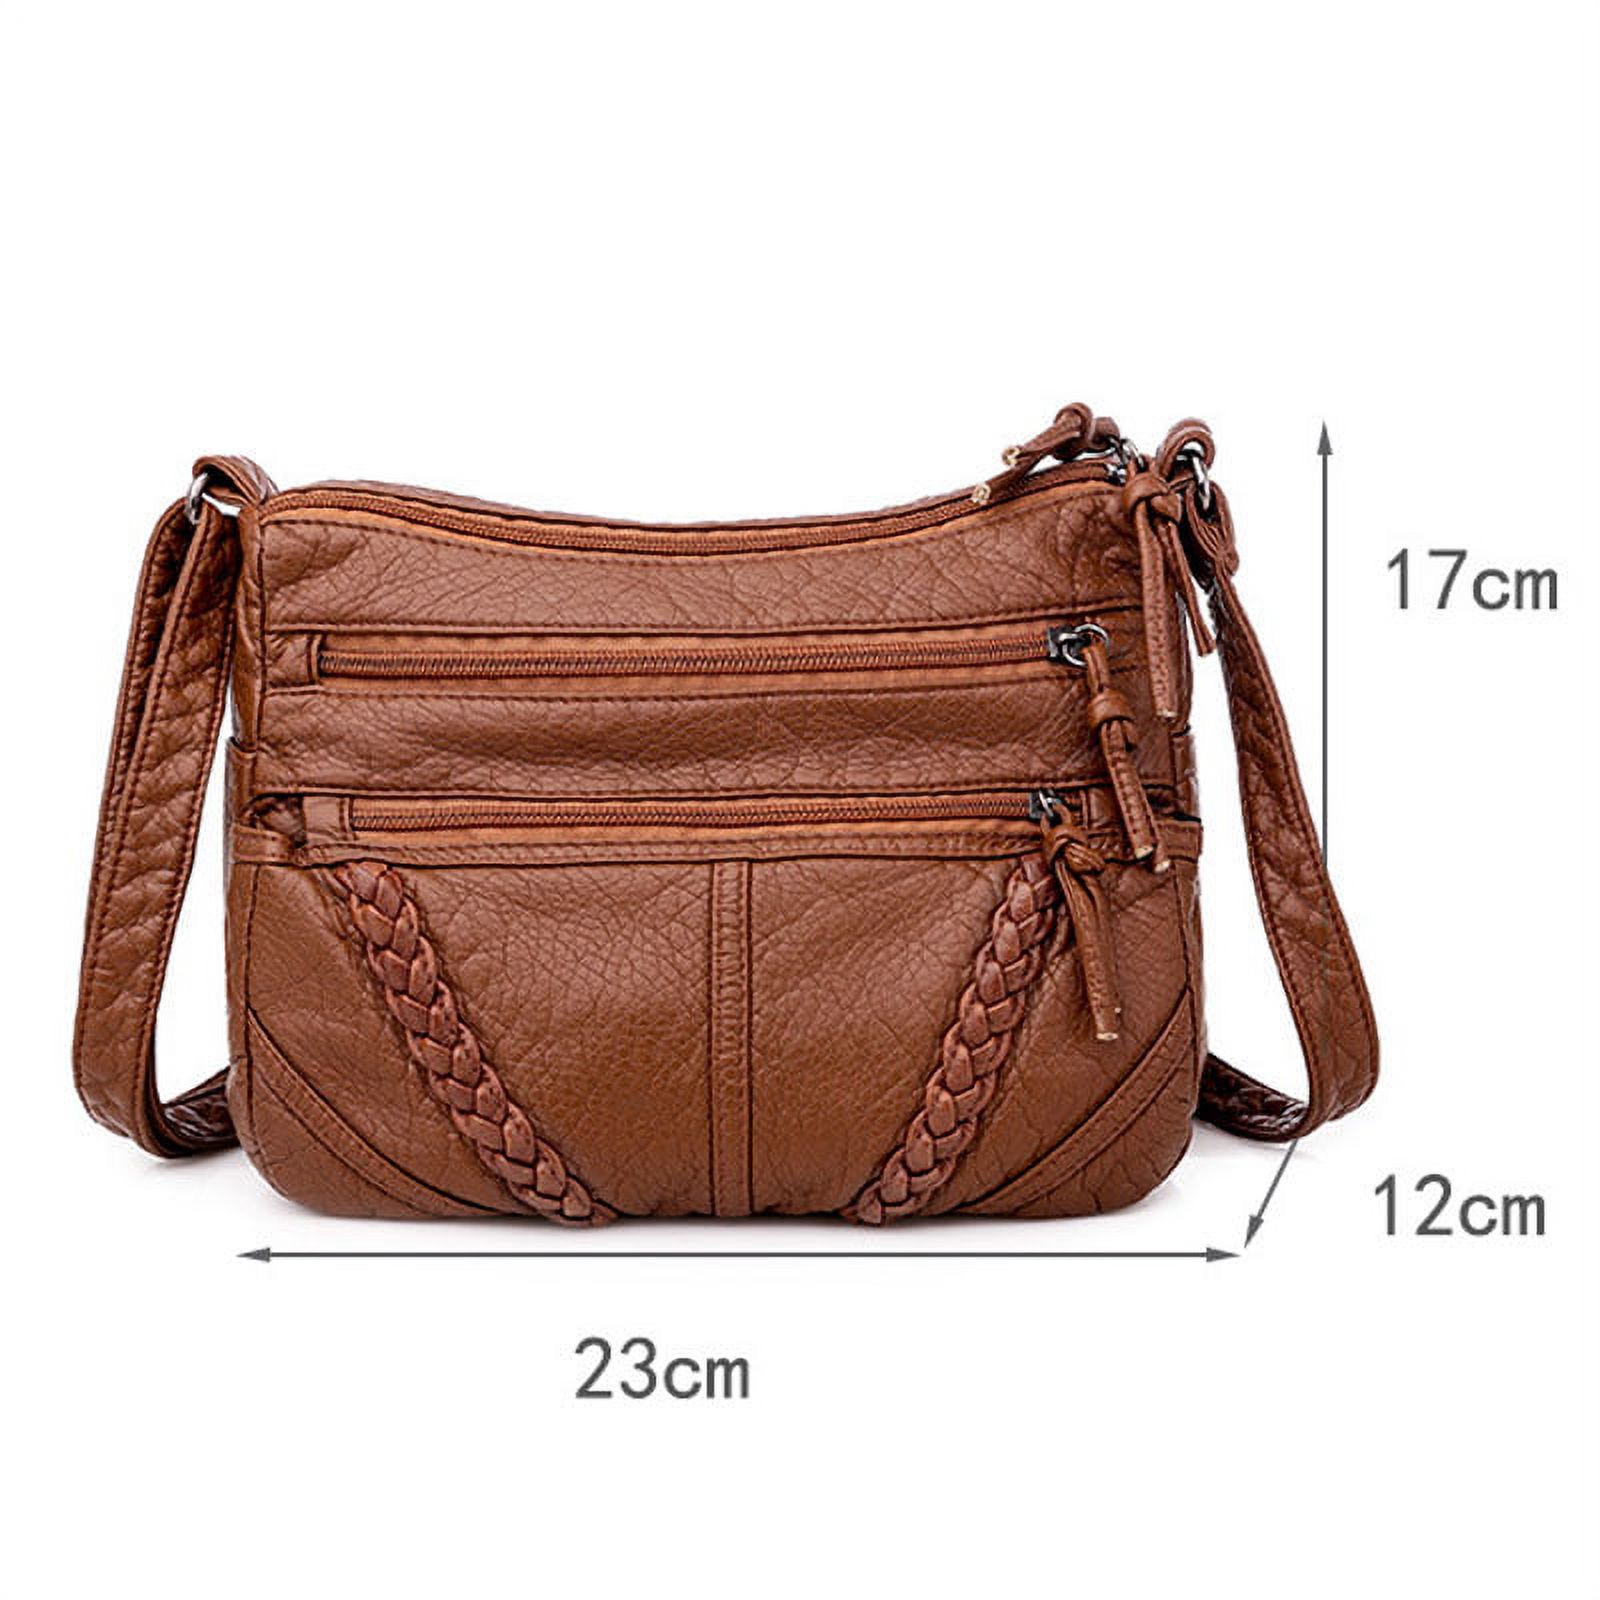 Ablanczoom Women's Soft PU Leather Shoulder Bags Classic Casual Crossbody Bag for Female - image 2 of 6